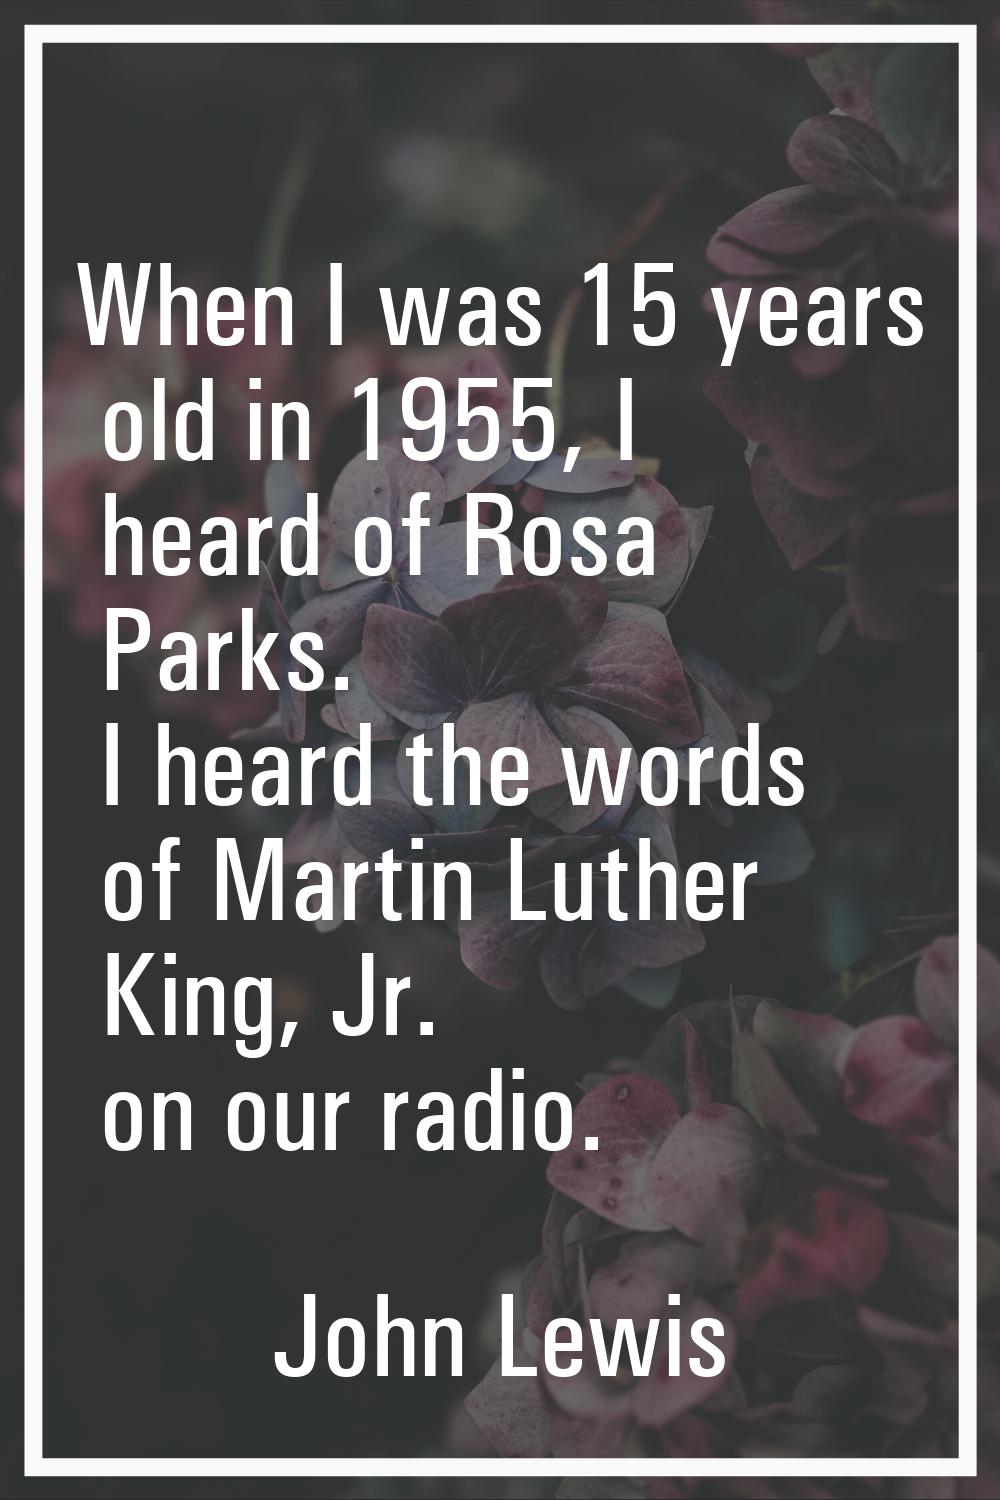 When I was 15 years old in 1955, I heard of Rosa Parks. I heard the words of Martin Luther King, Jr